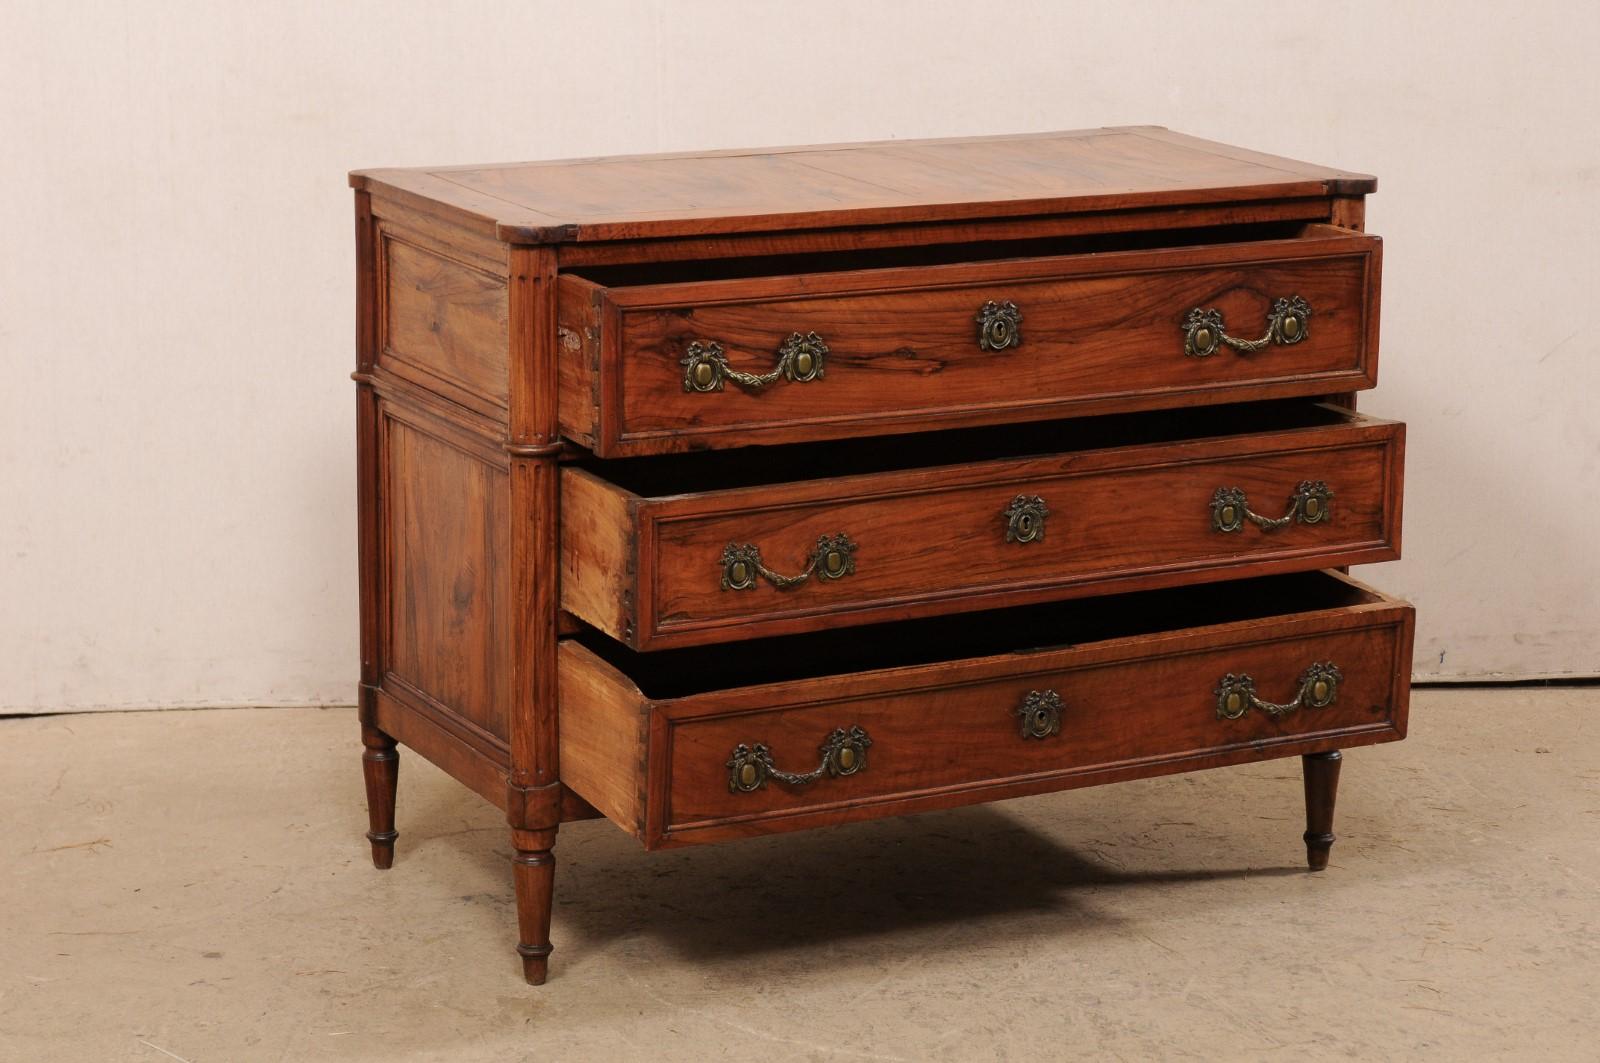 19th Century French Period Neoclassical Commode w/Beautiful Wood Grain & Neoclassic Hardware For Sale